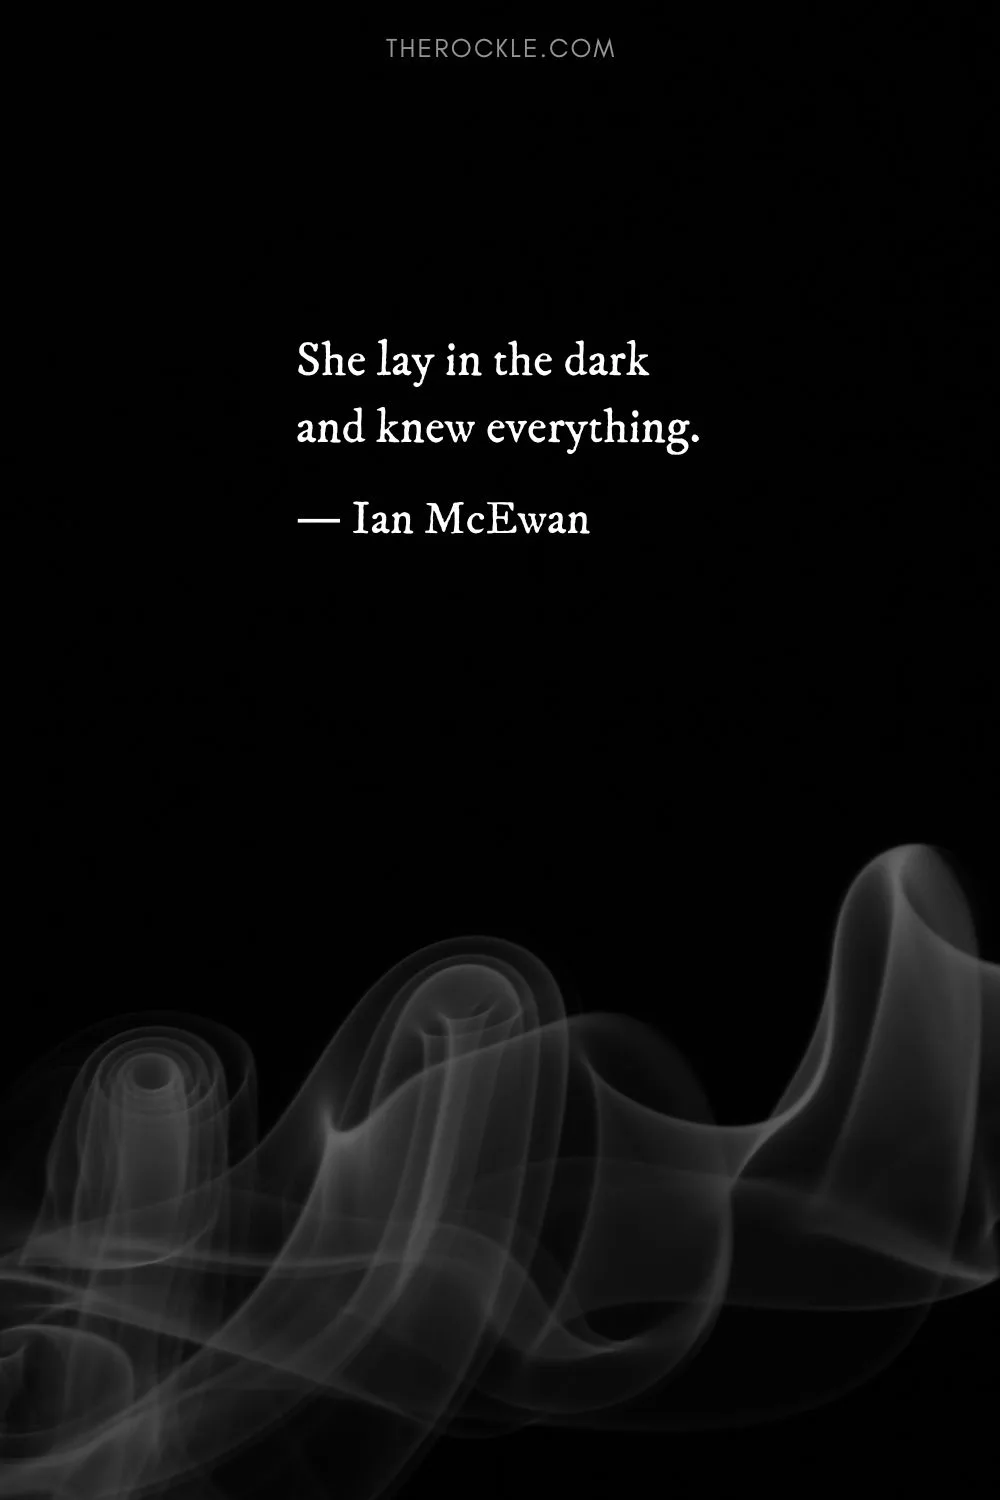 Ian McEwan's dark love quote: “She lay in the dark and knew everything.” 